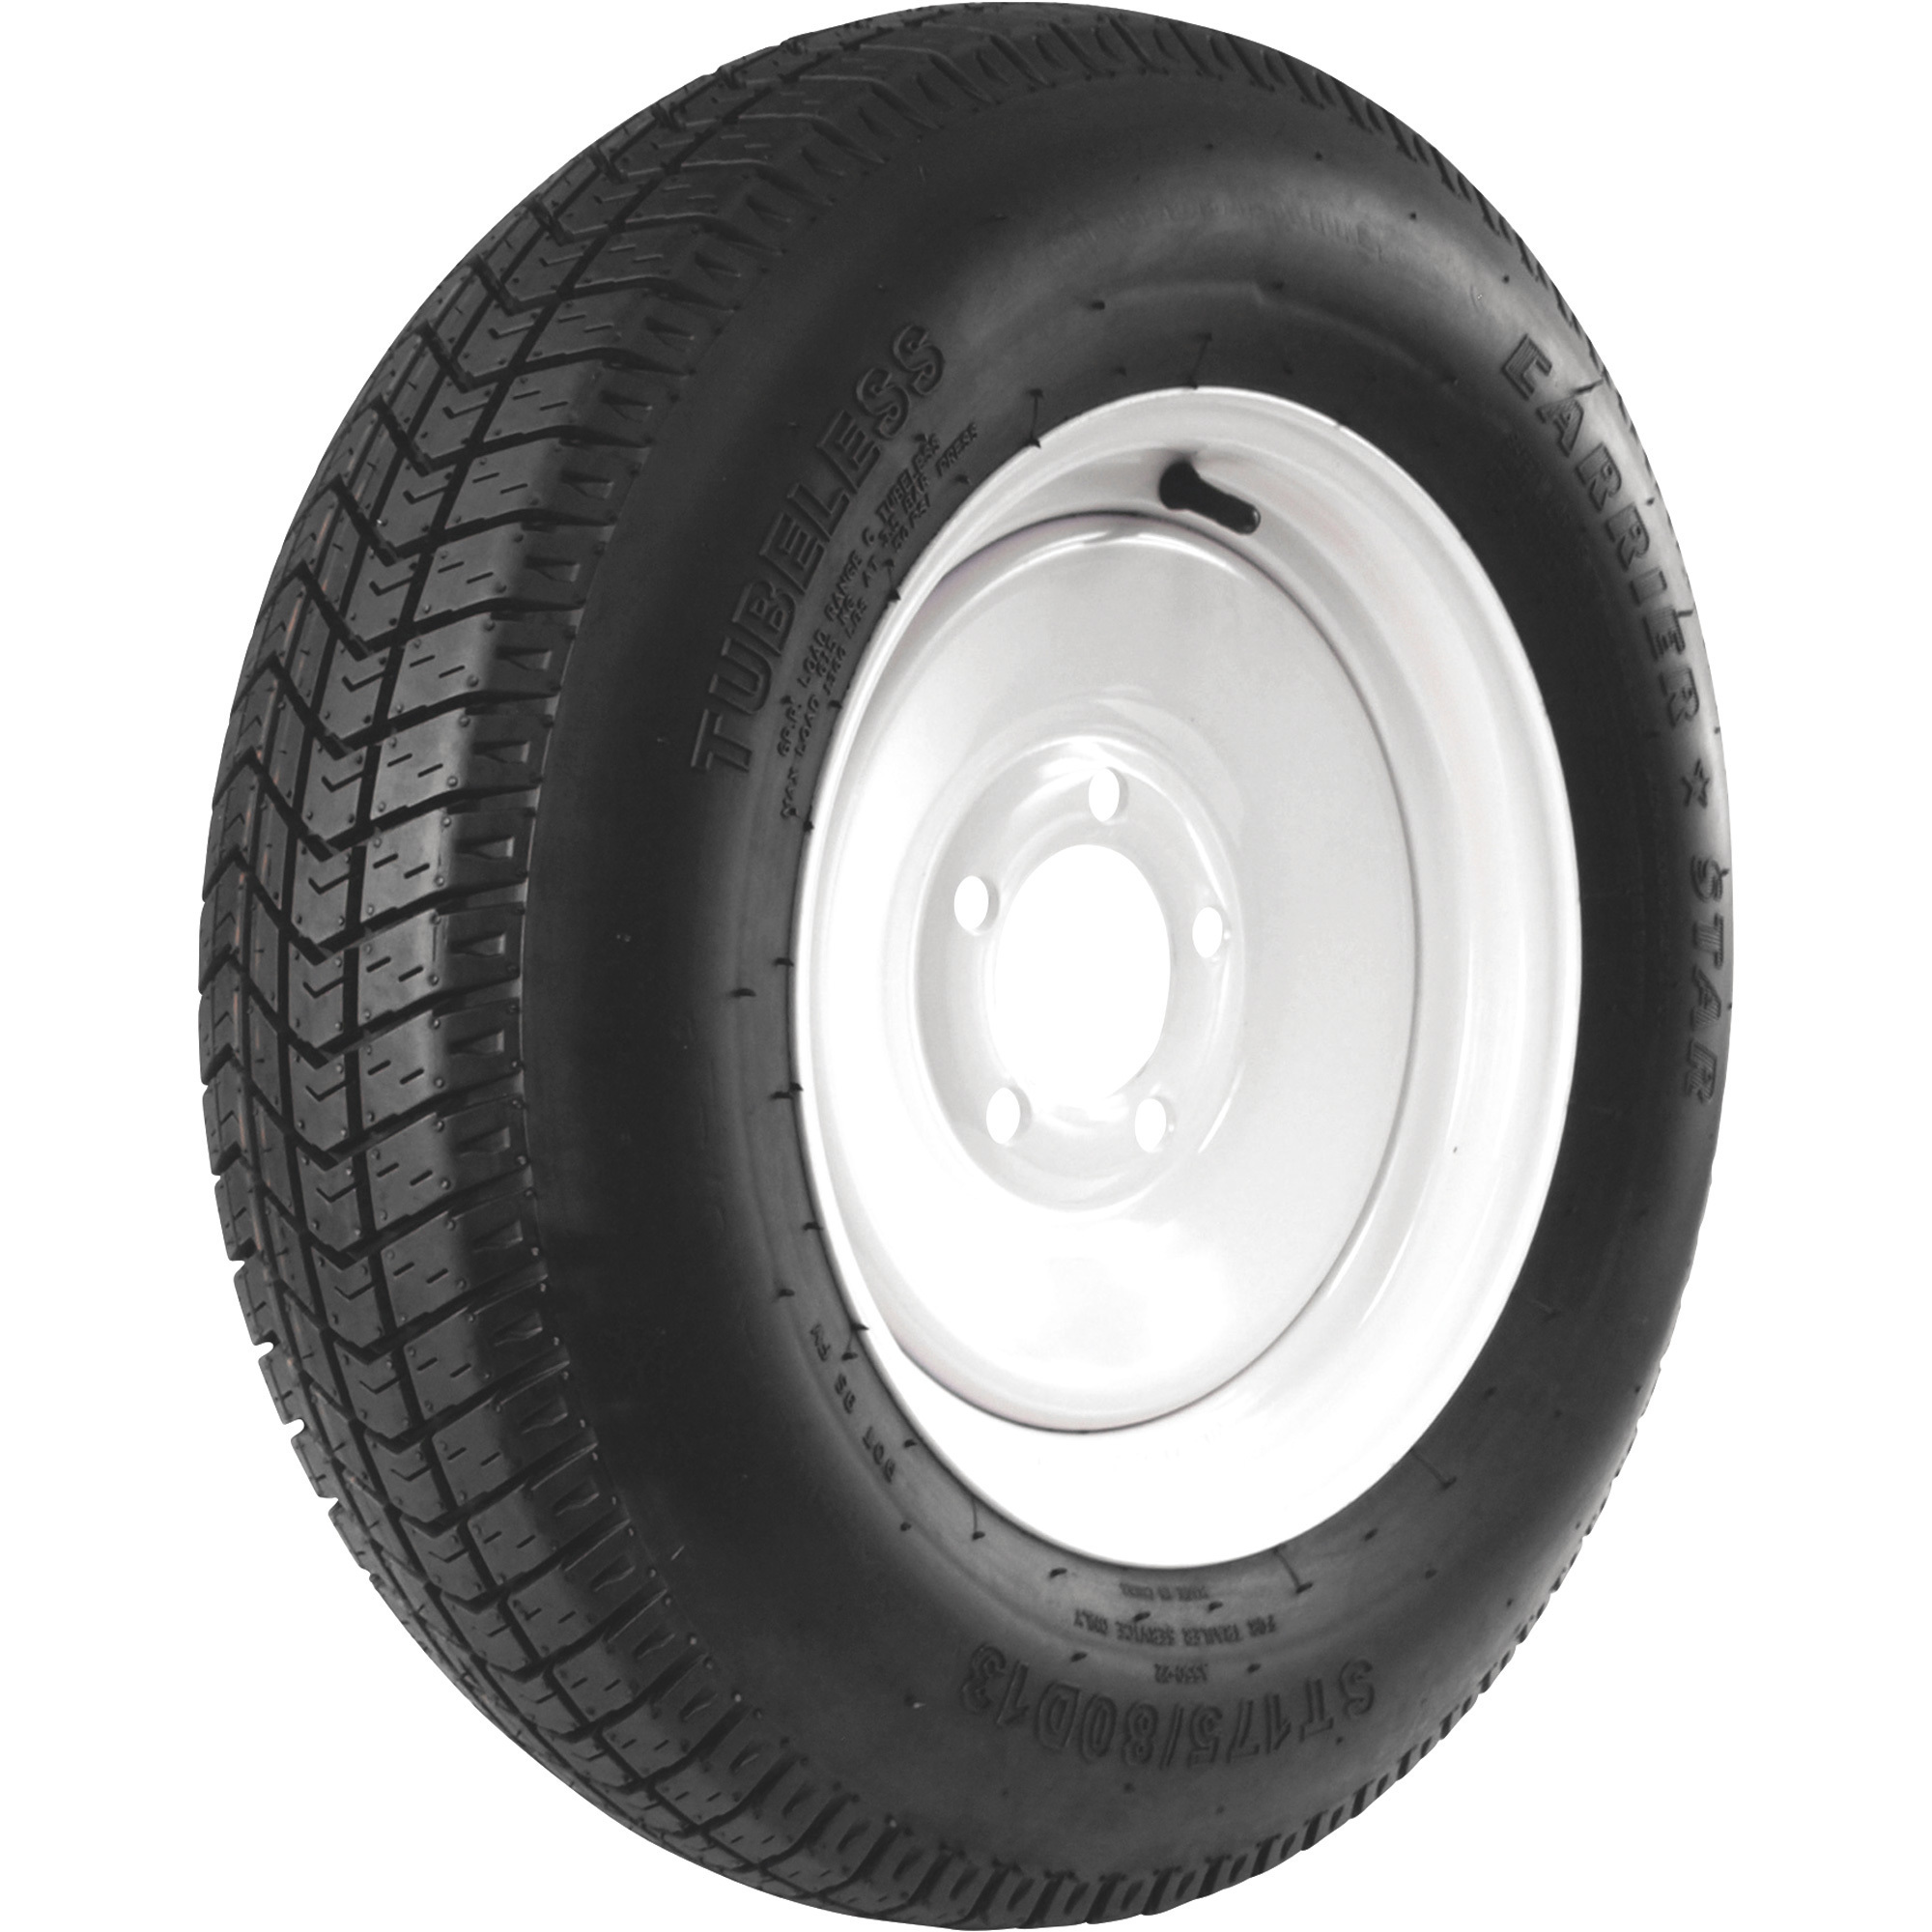 Martin Wheel Carrier Star 13Inch Bias-Ply Trailer Tire and Wheel Assembly â ST175/80D-13, 5-Hole, Load Range C, Model DM175D3C-5IN